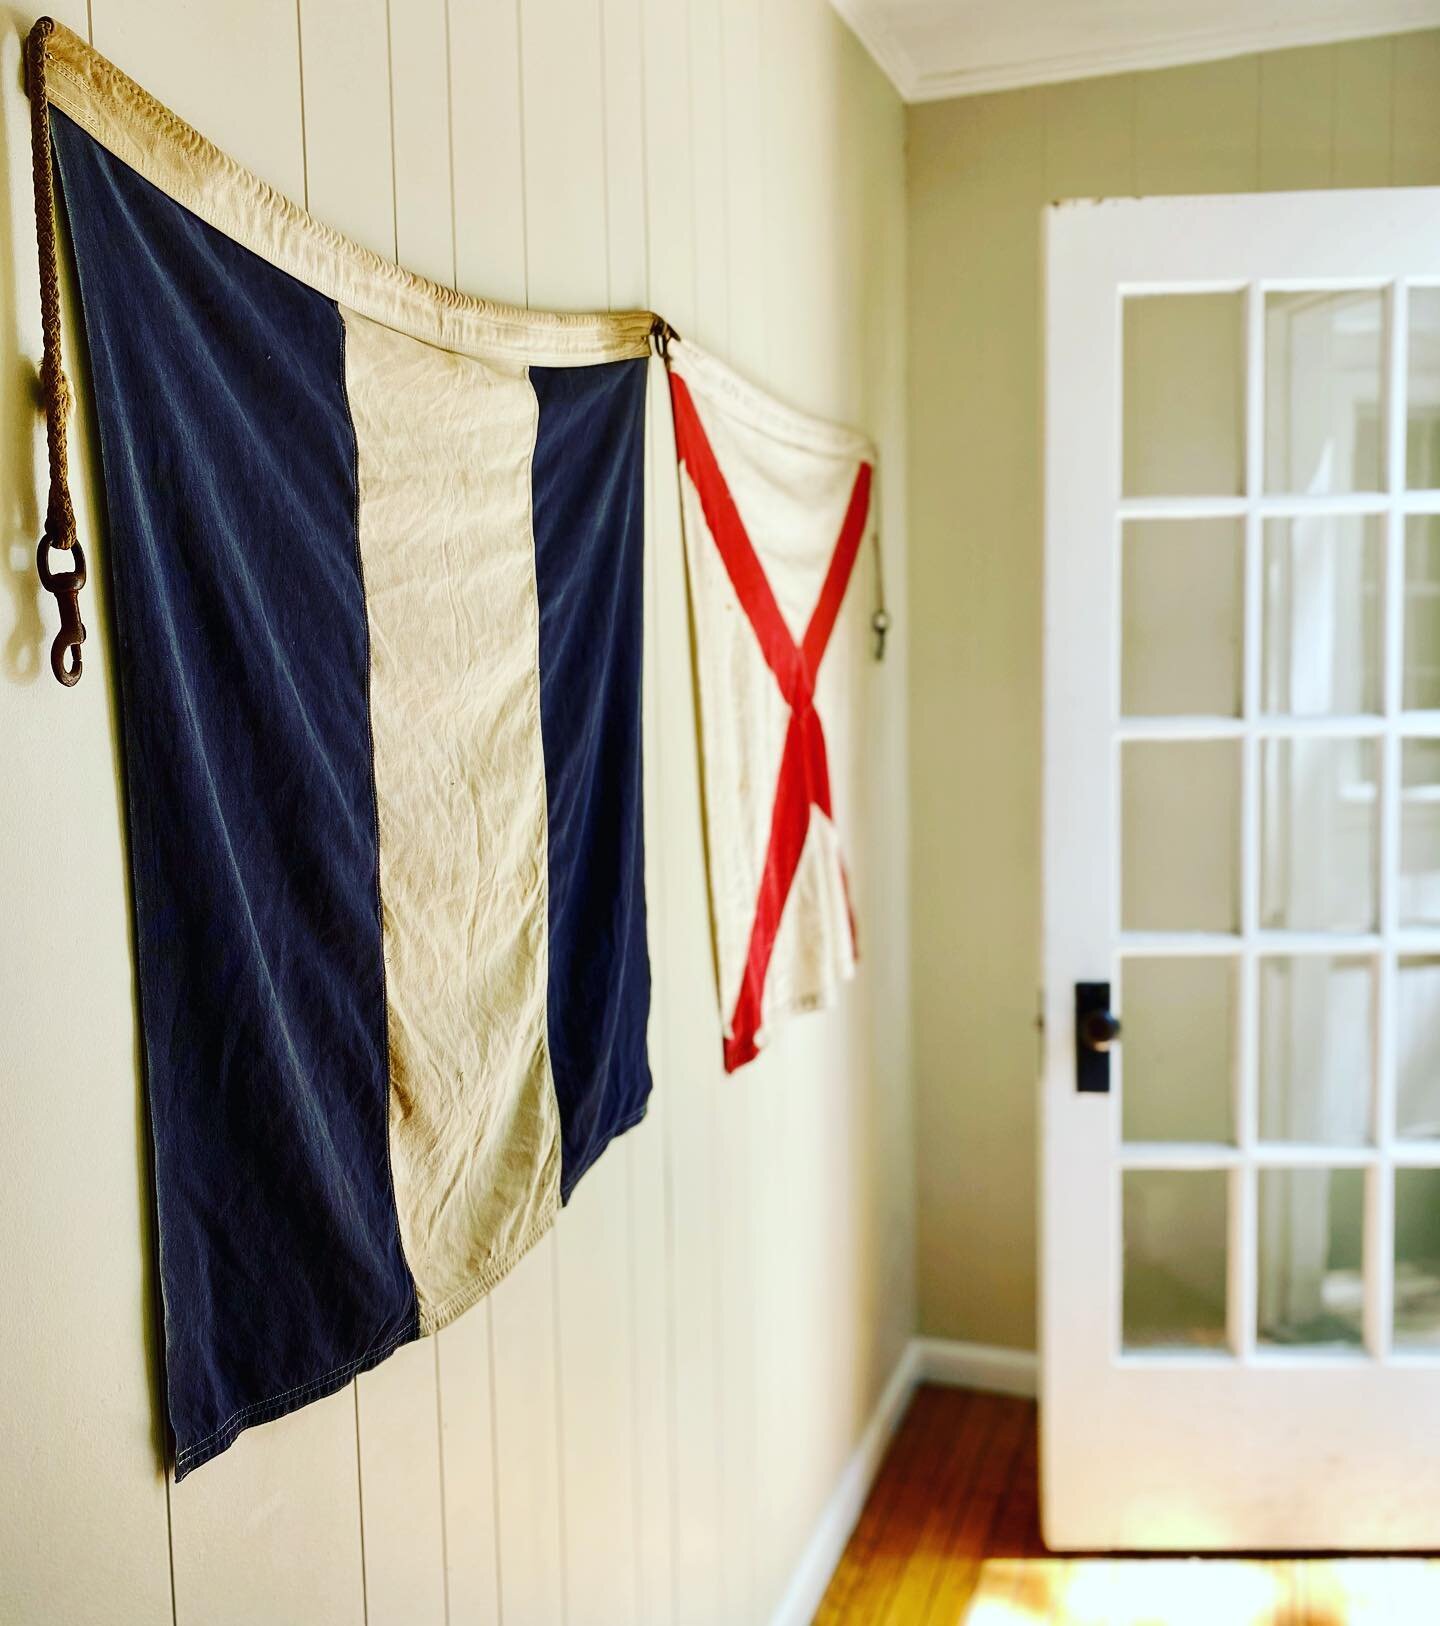 Character&hellip; history and more&hellip; install at @basinharbor #letthesunshinein ☀️⛵️#nauticalflags #vintage #design #cottages #basinharbor #joannepalmisano